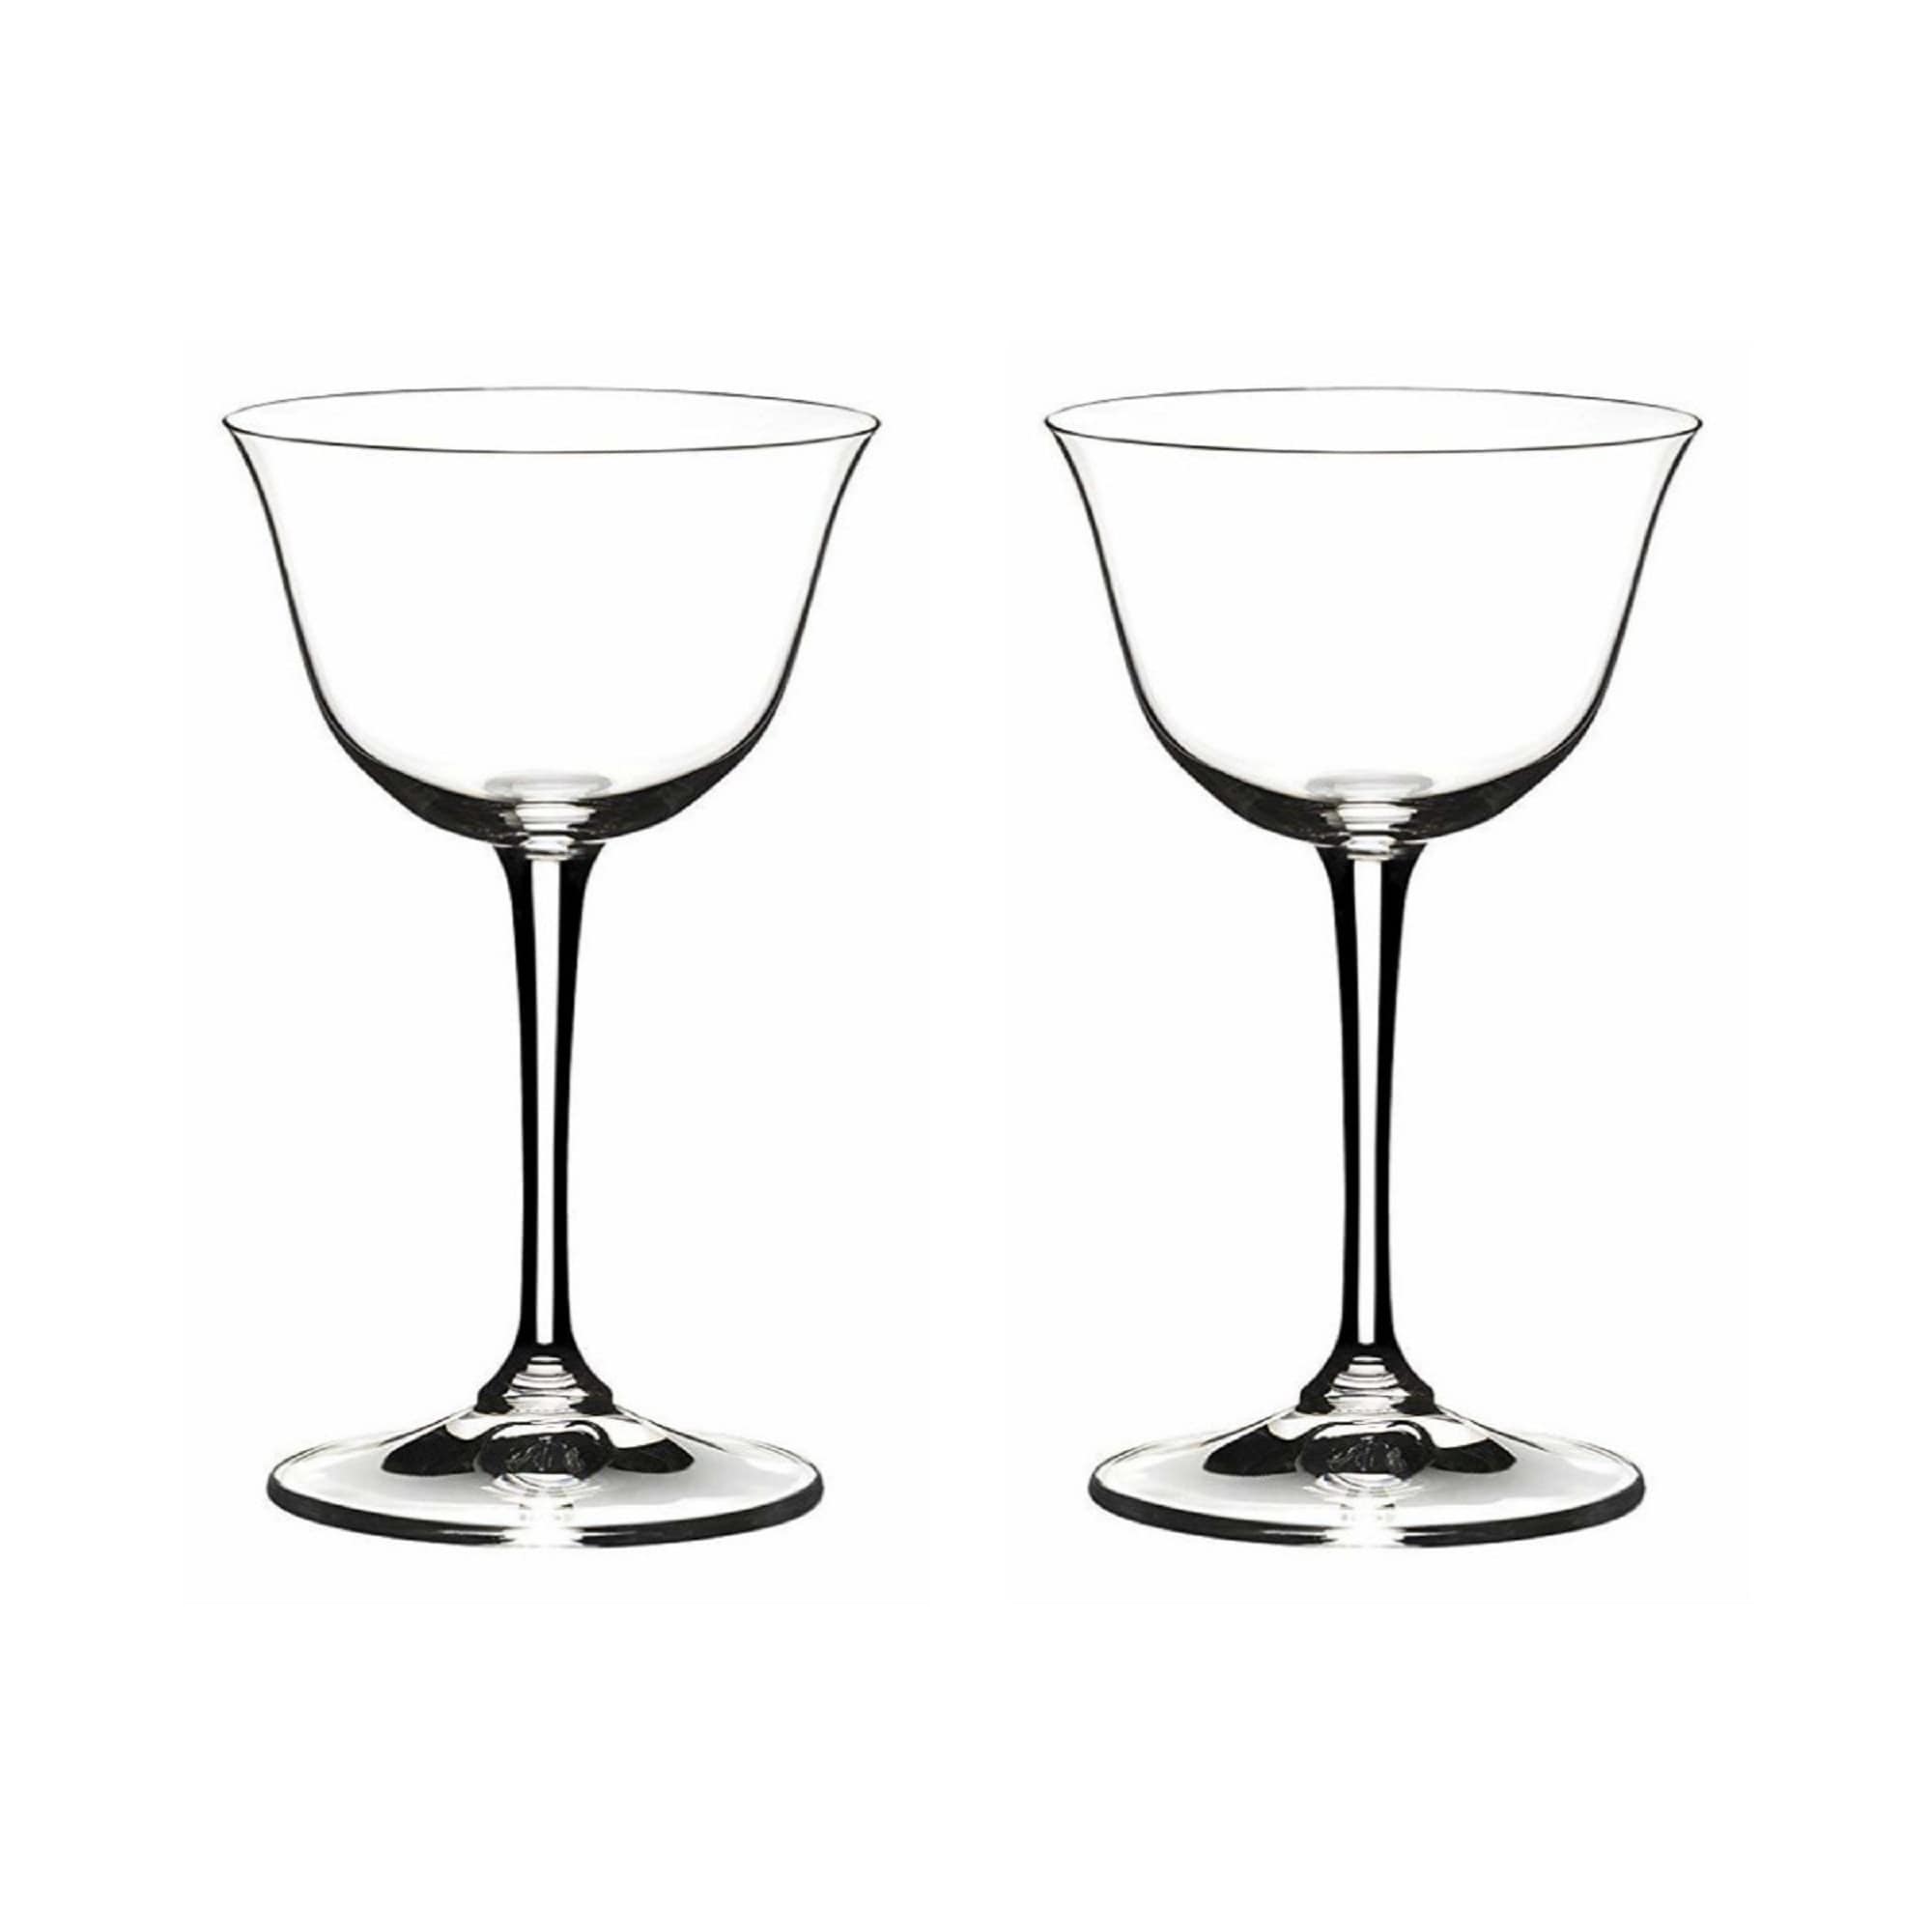 https://ak1.ostkcdn.com/images/products/is/images/direct/534e66020a978494c9462a0f7add0b1e72835ec7/Riedel-Drink-Specific-Glassware-Sour-Cocktail-Glass-%287-oz%2C-Clear%29.jpg